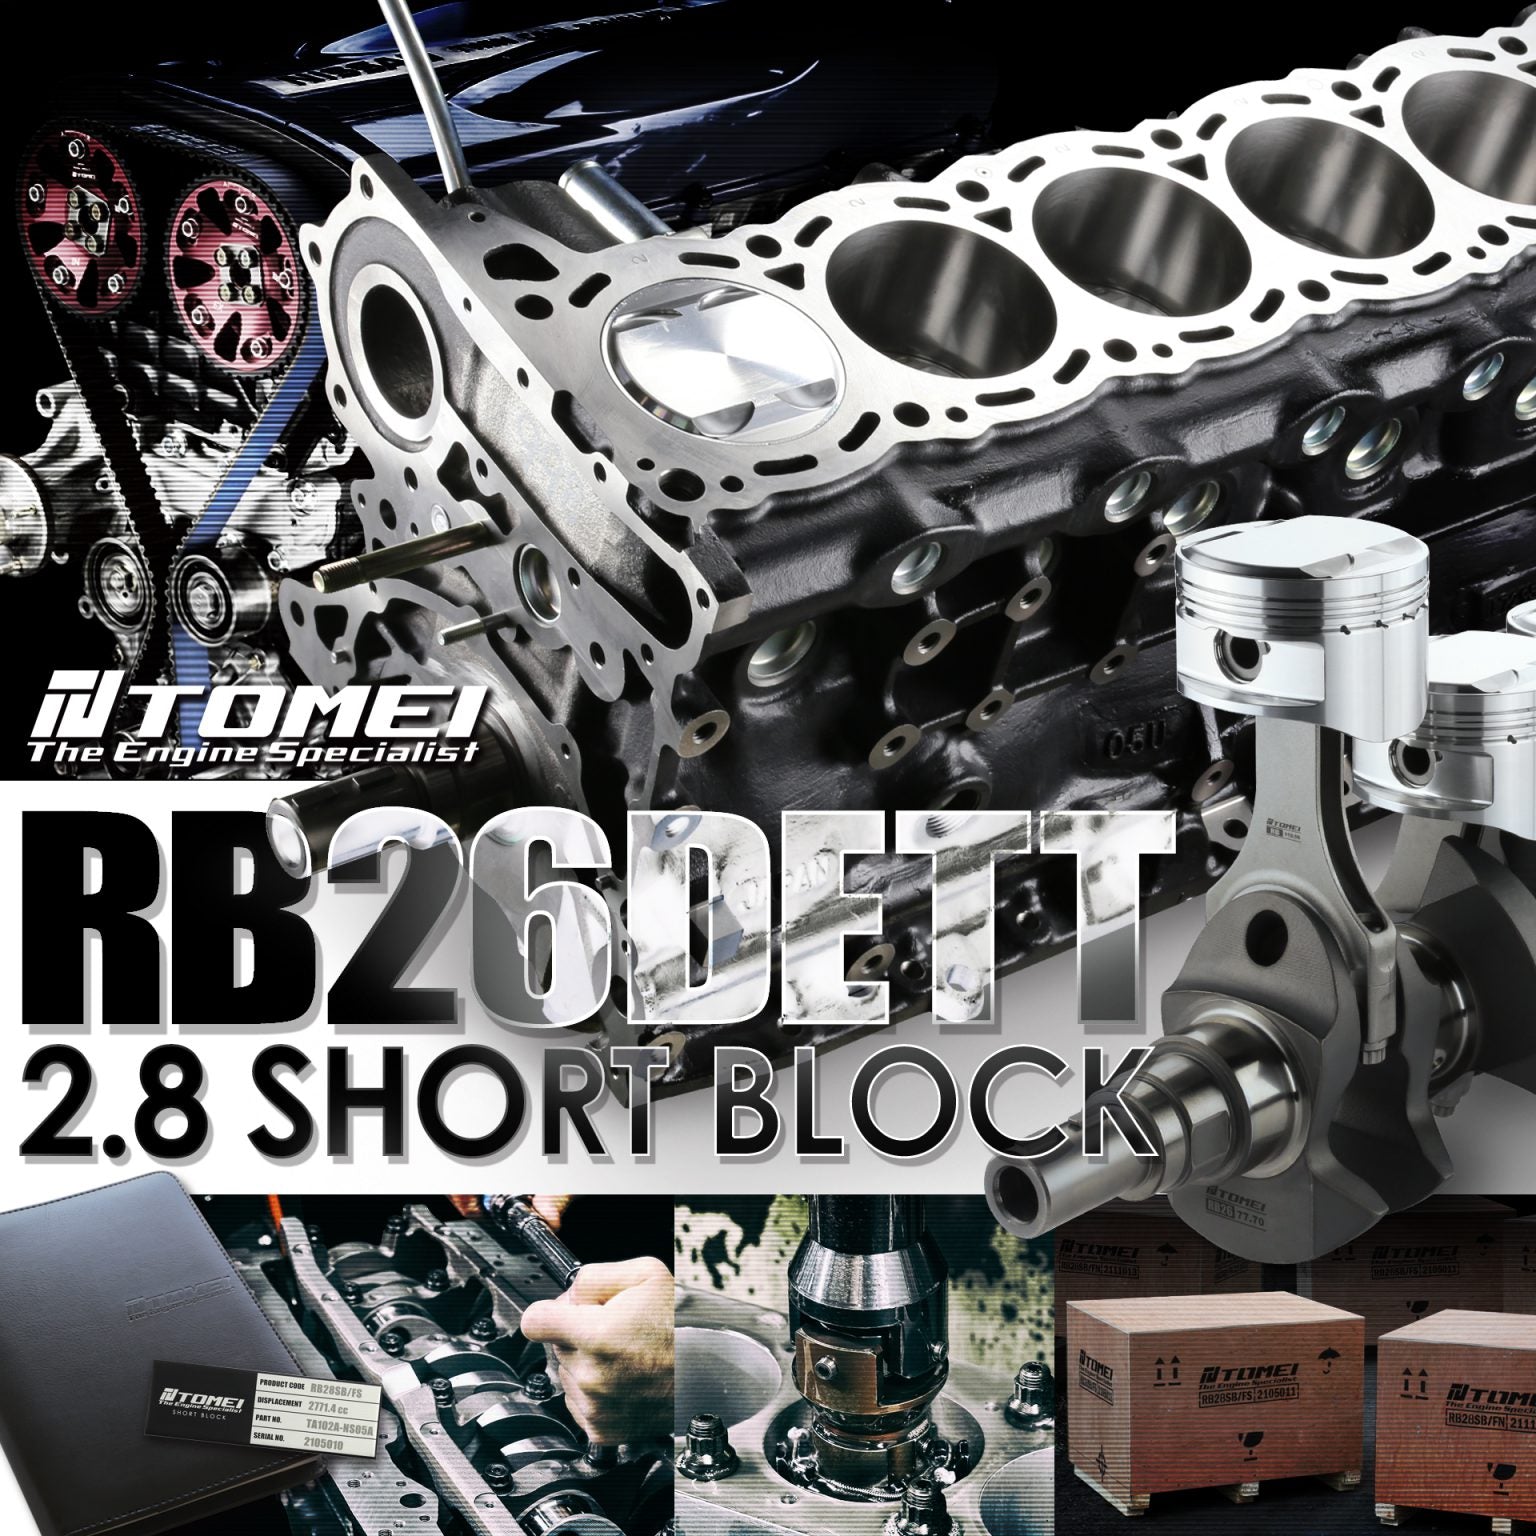 New Product Release - ULTIMATE RB26 2.8 SHORT BLOCK